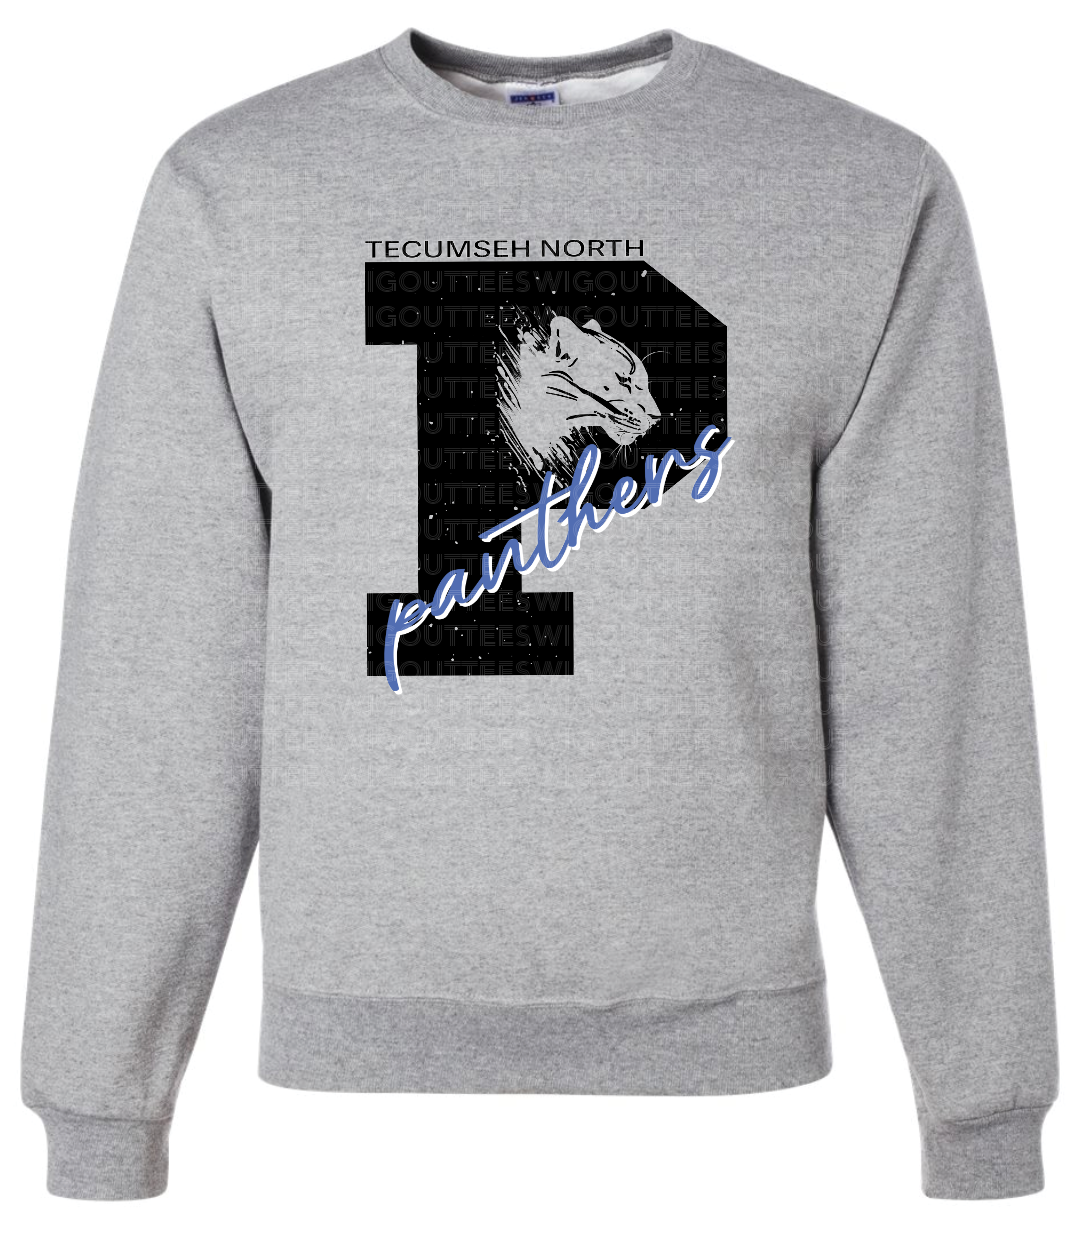 P is for Panther Crew Sweatshirt